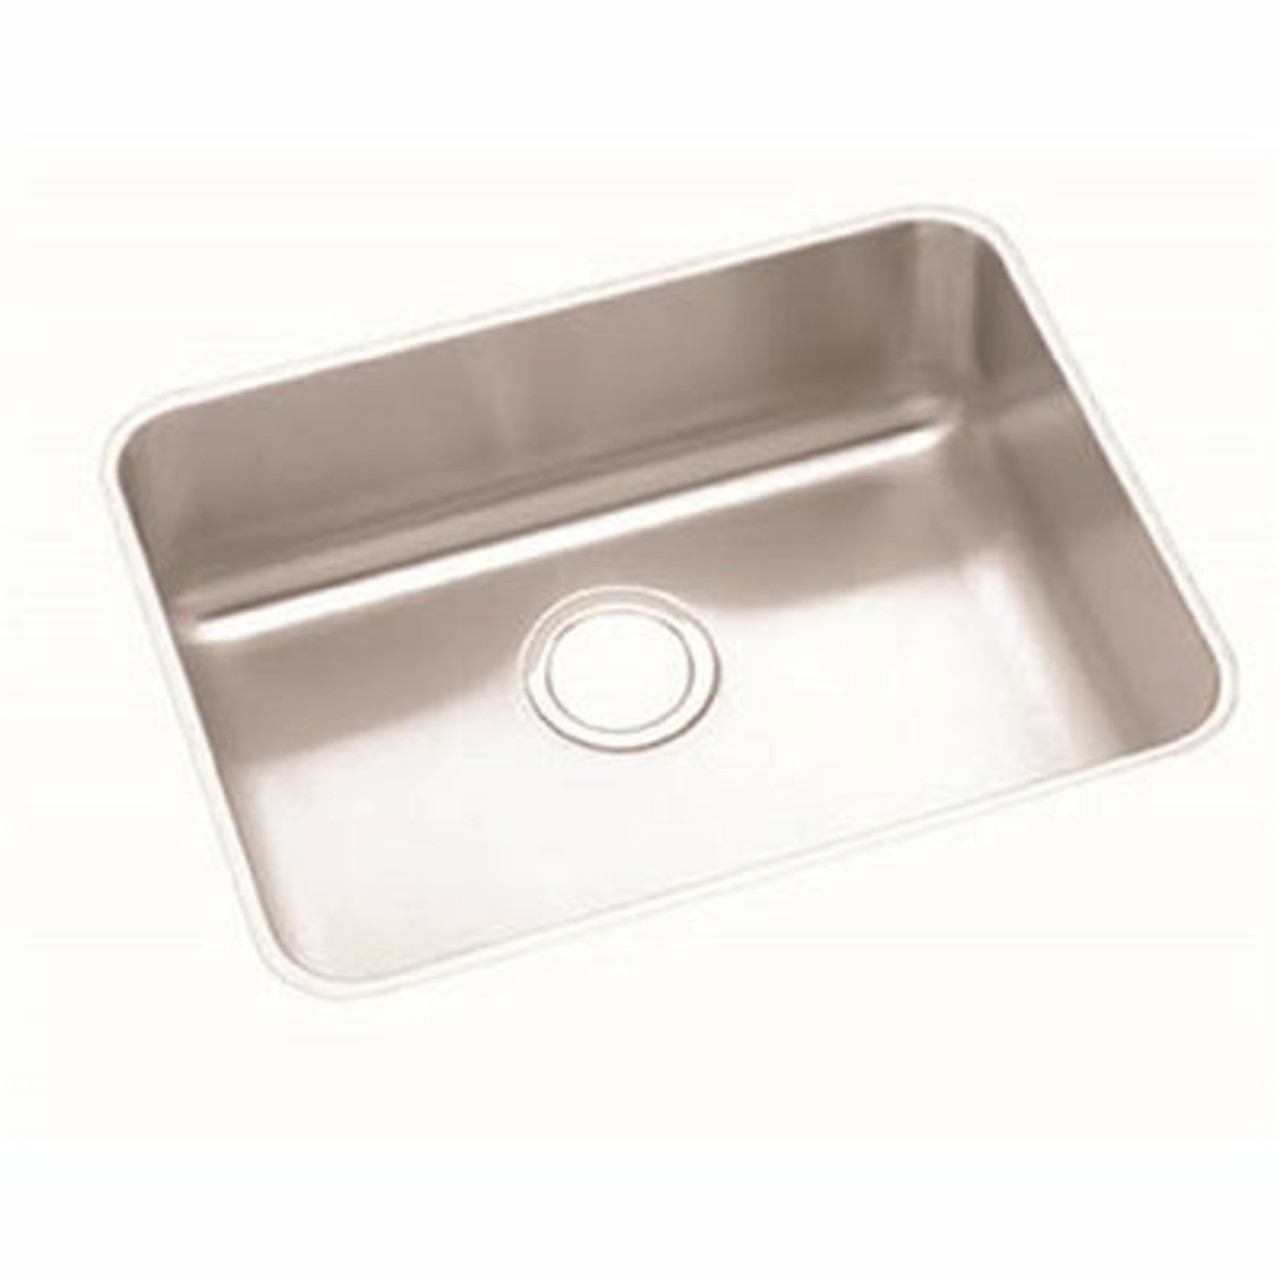 Elkay Lustertone Undermount Stainless Steel 24 In. Single Bowl Kitchen Sink With 5 In. Bowl Ada Compliant